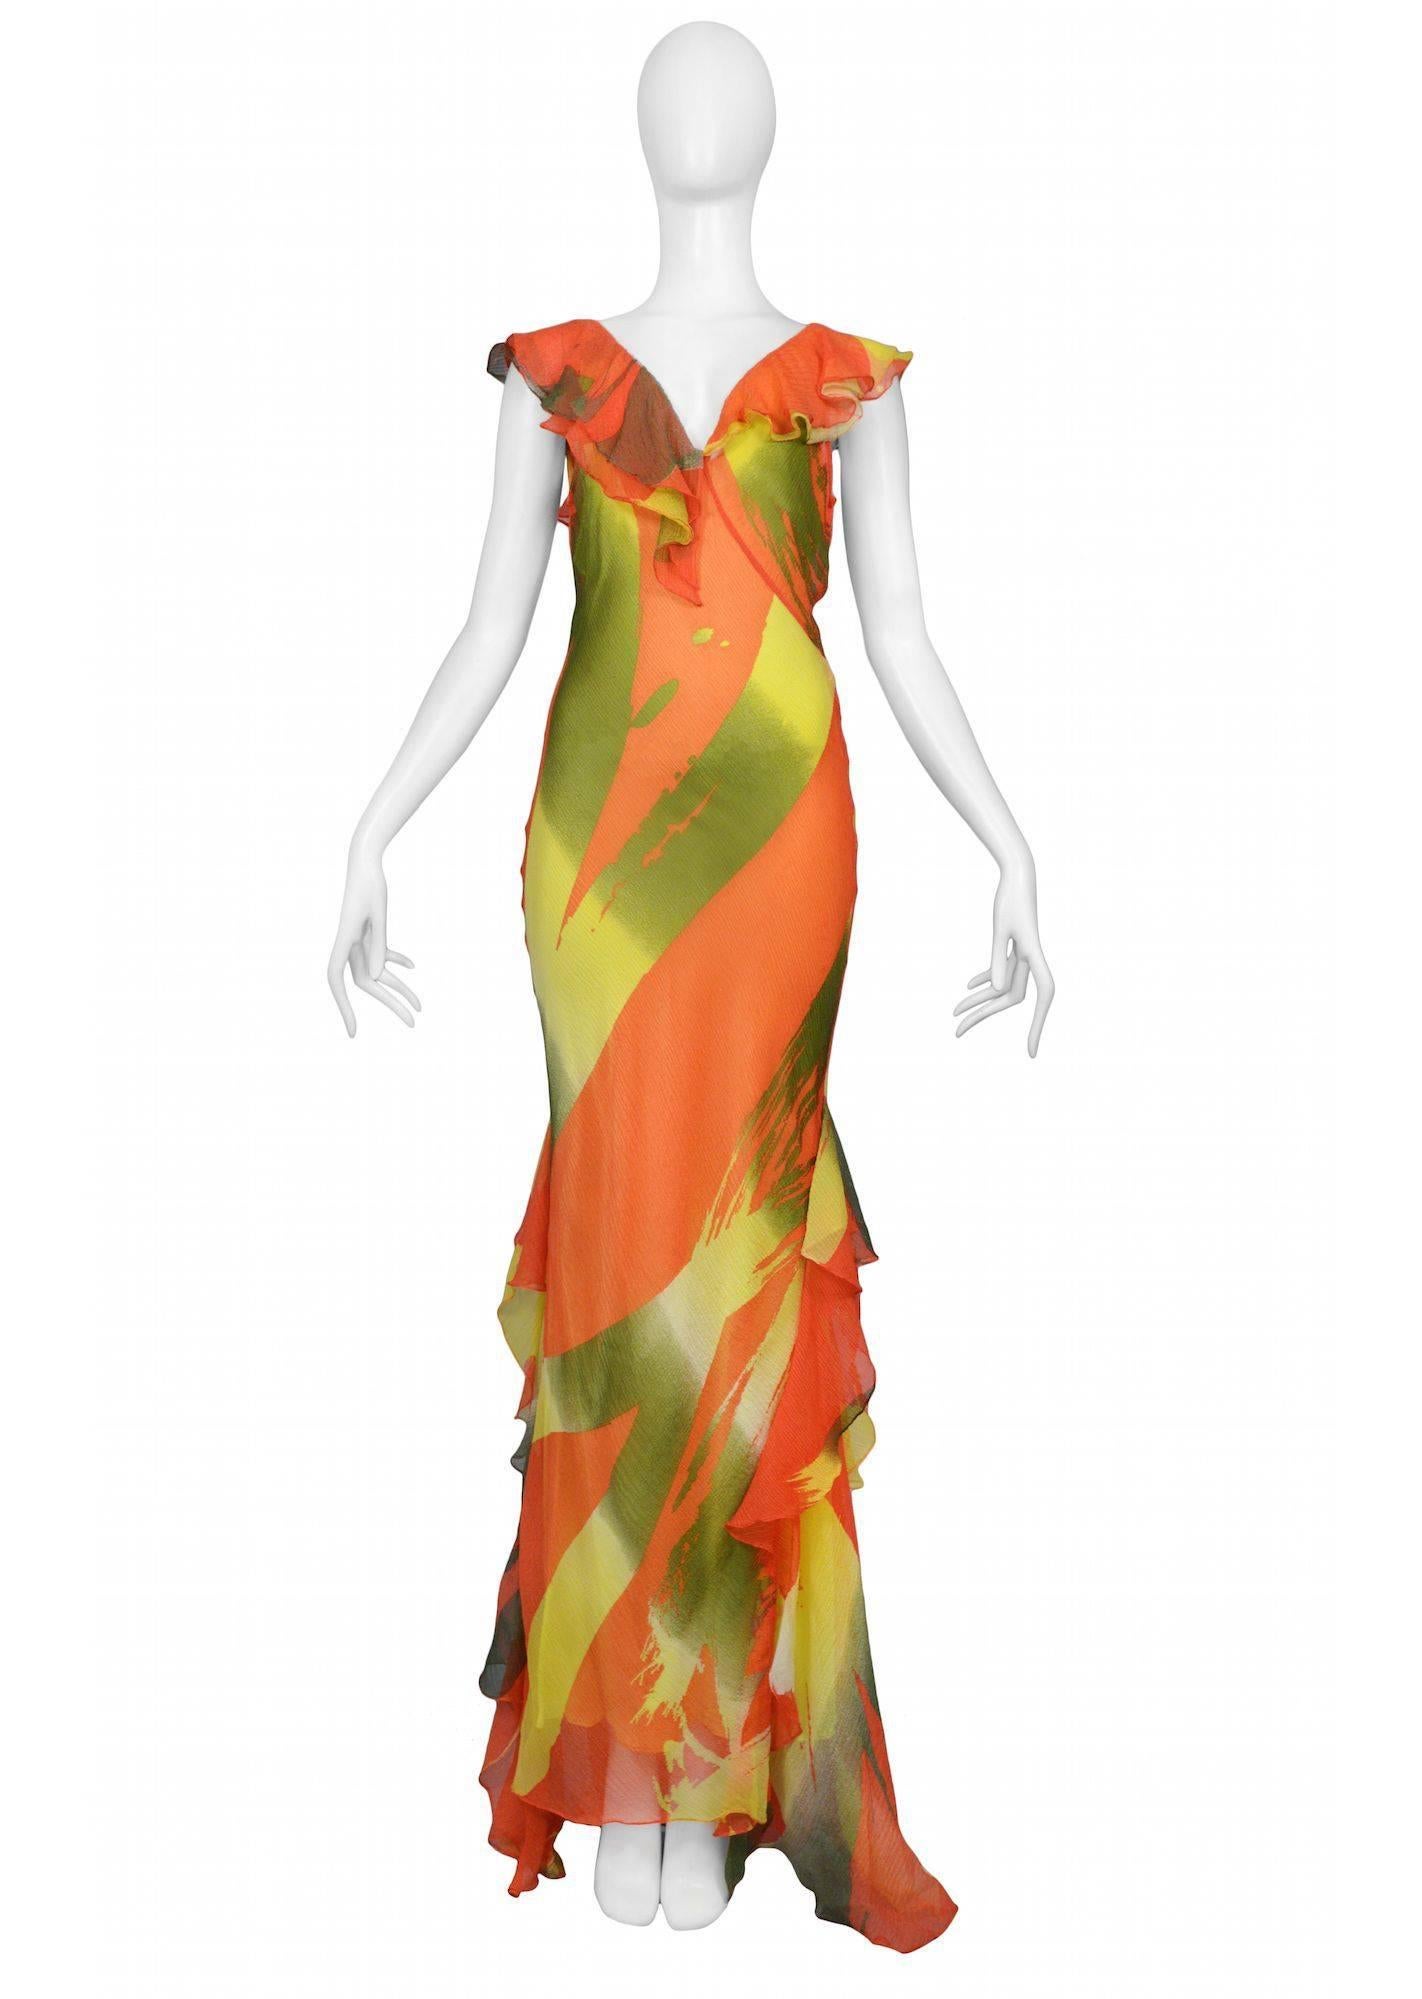 Vintage Stephen Burrows vibrant orange, yellow, and green abstract print bias cut chiffon evening gown with V-neckline, ruffles and lime satin slip dress.

Excellent Condition.

Size 2